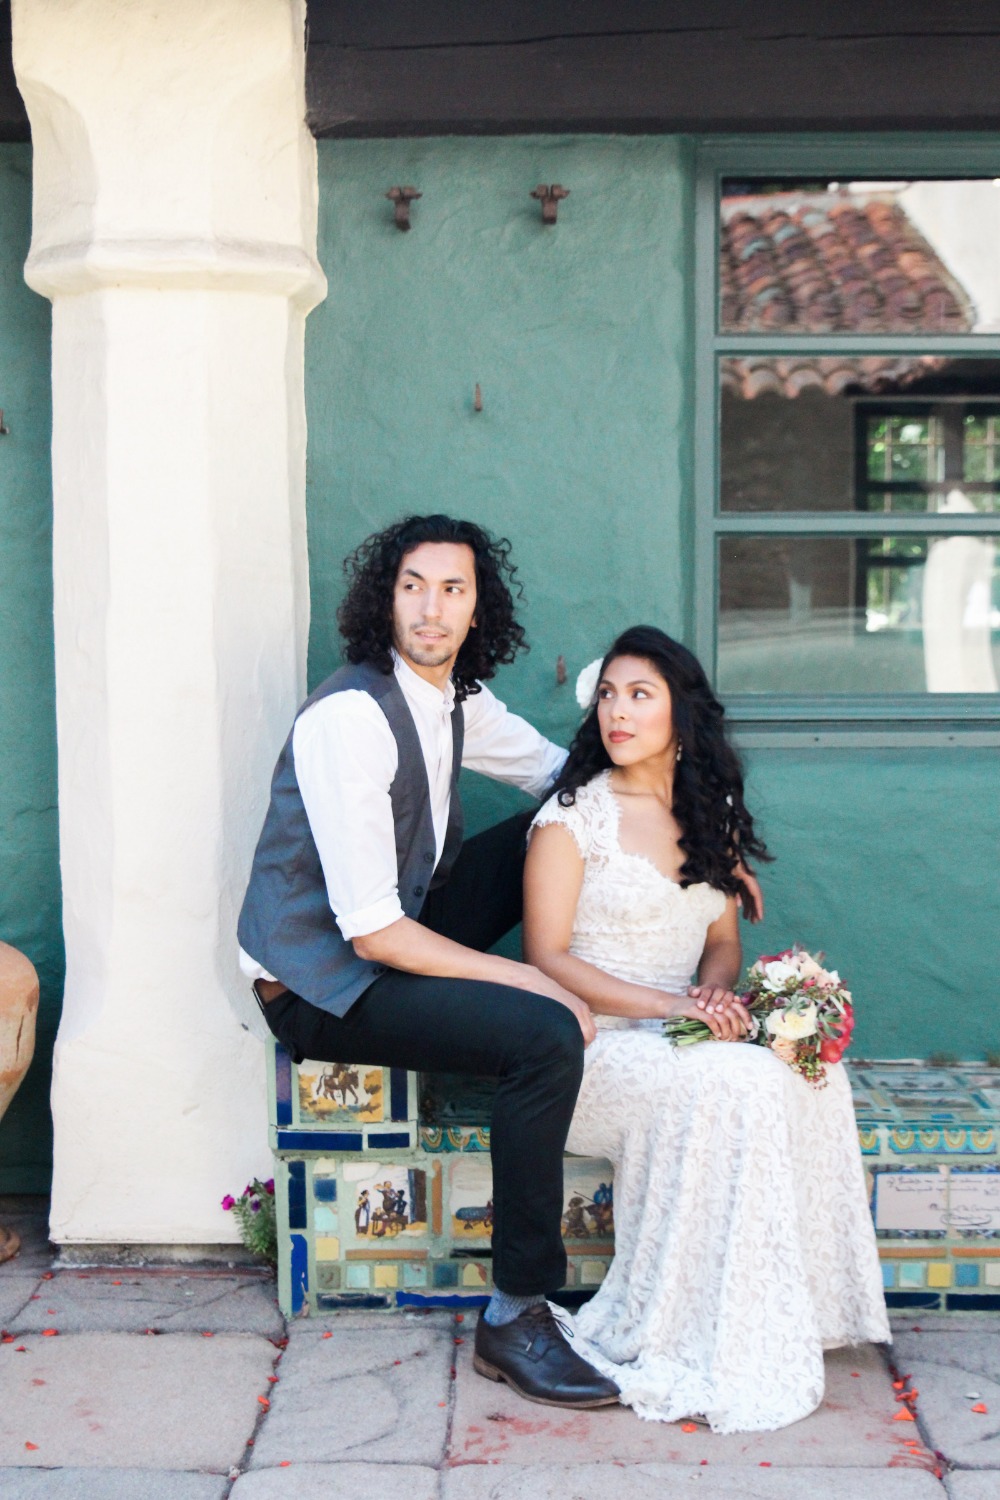 Old world Mexico inspired wedding ideas